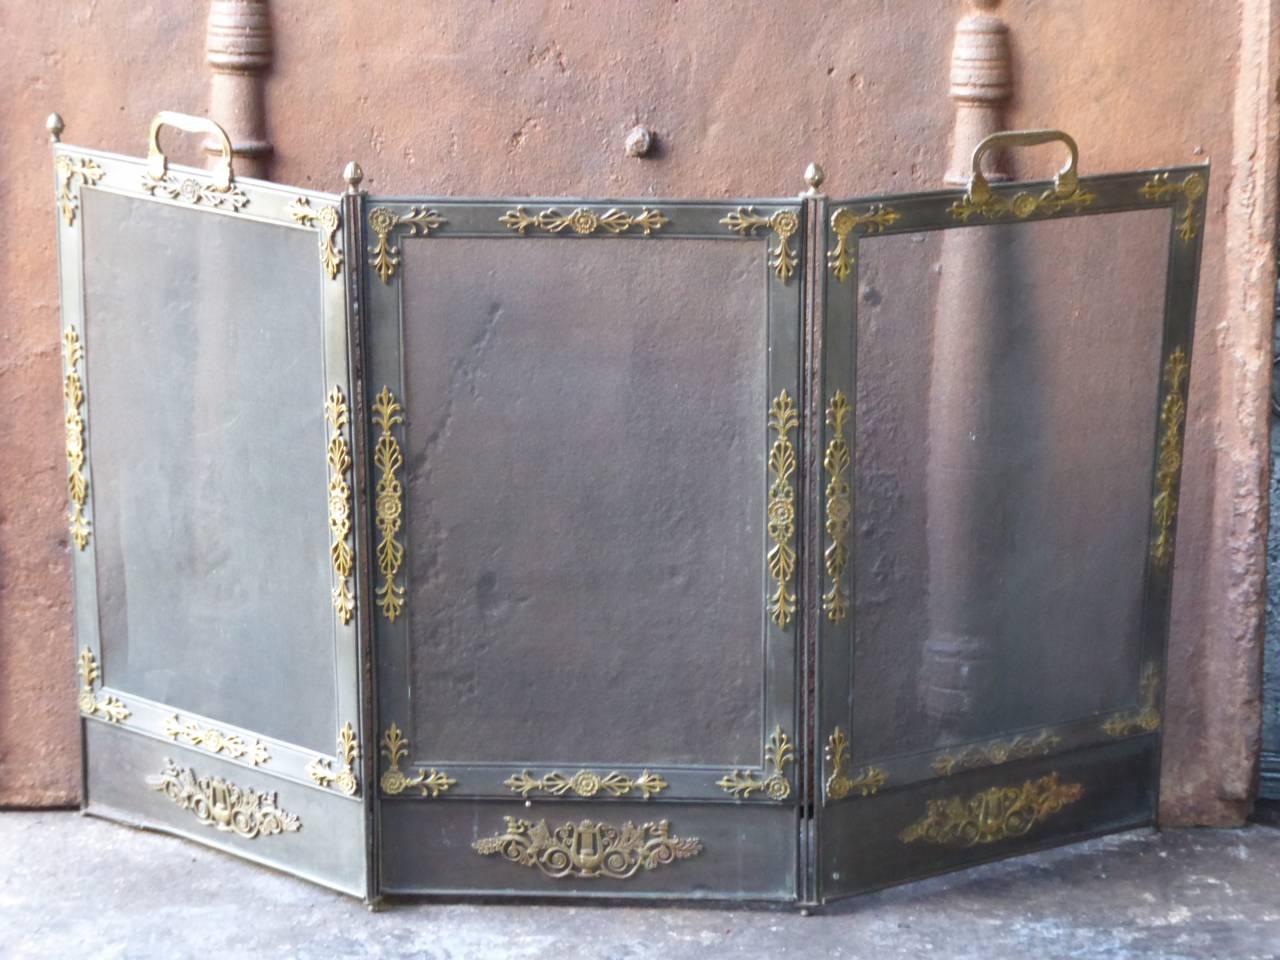 19th century French fireplace screen made of iron, brass and iron mesh.

We have a unique and specialized collection of antique and used fireplace accessories consisting of more than 1000 listings at 1stdibs. Amongst others, we always have 300+